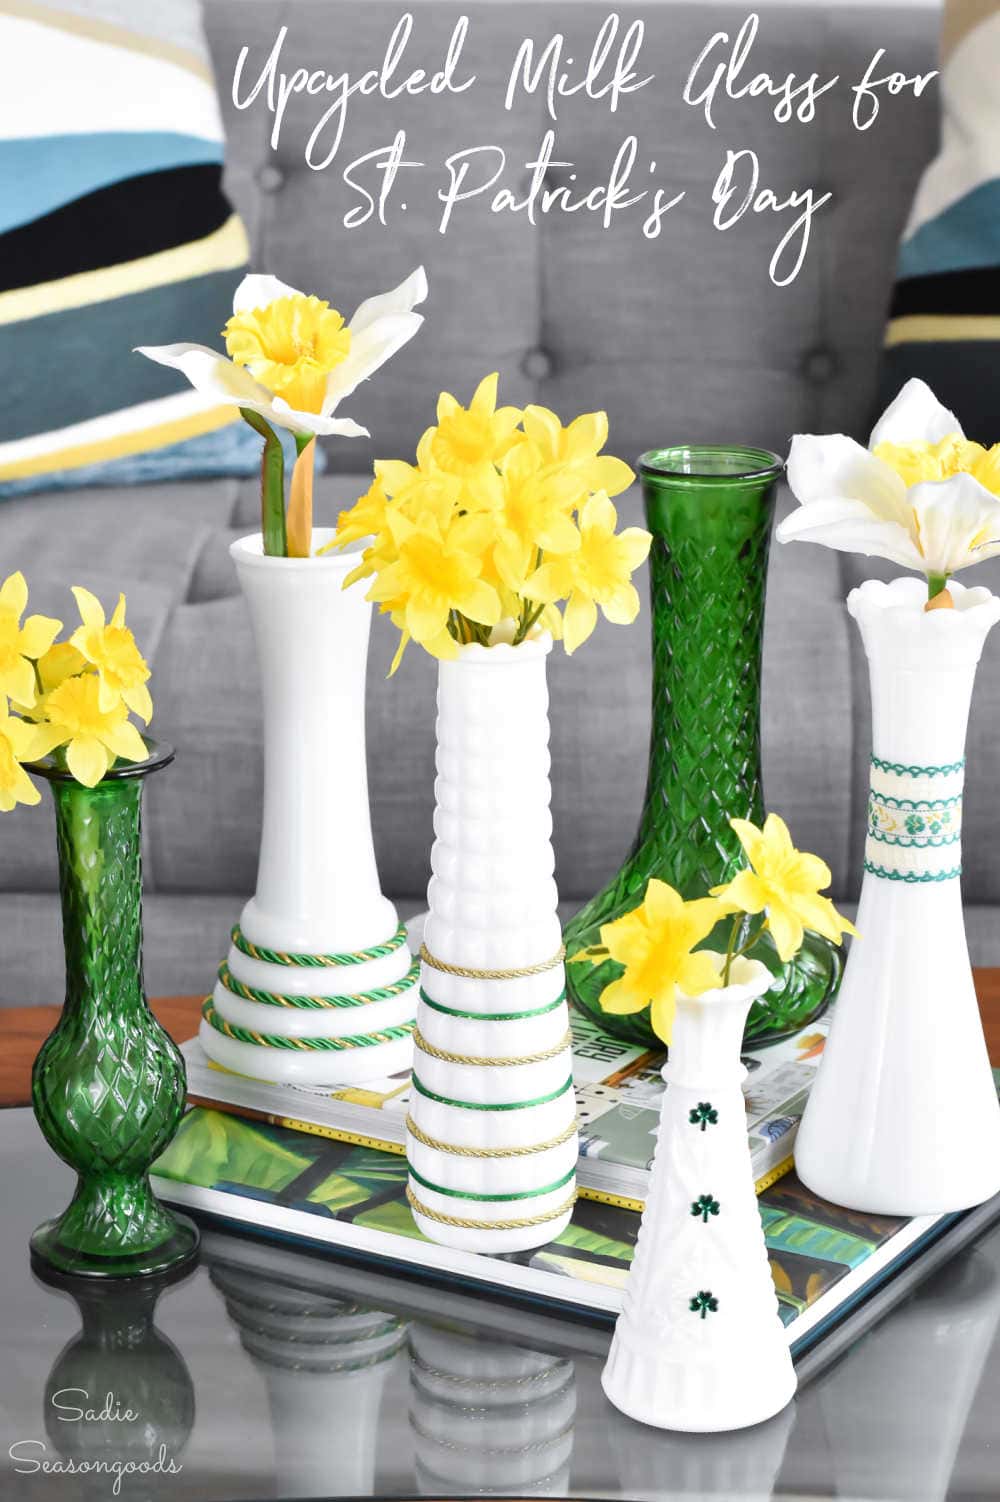 st. patrick's day decorations with green glass and milk glass vases